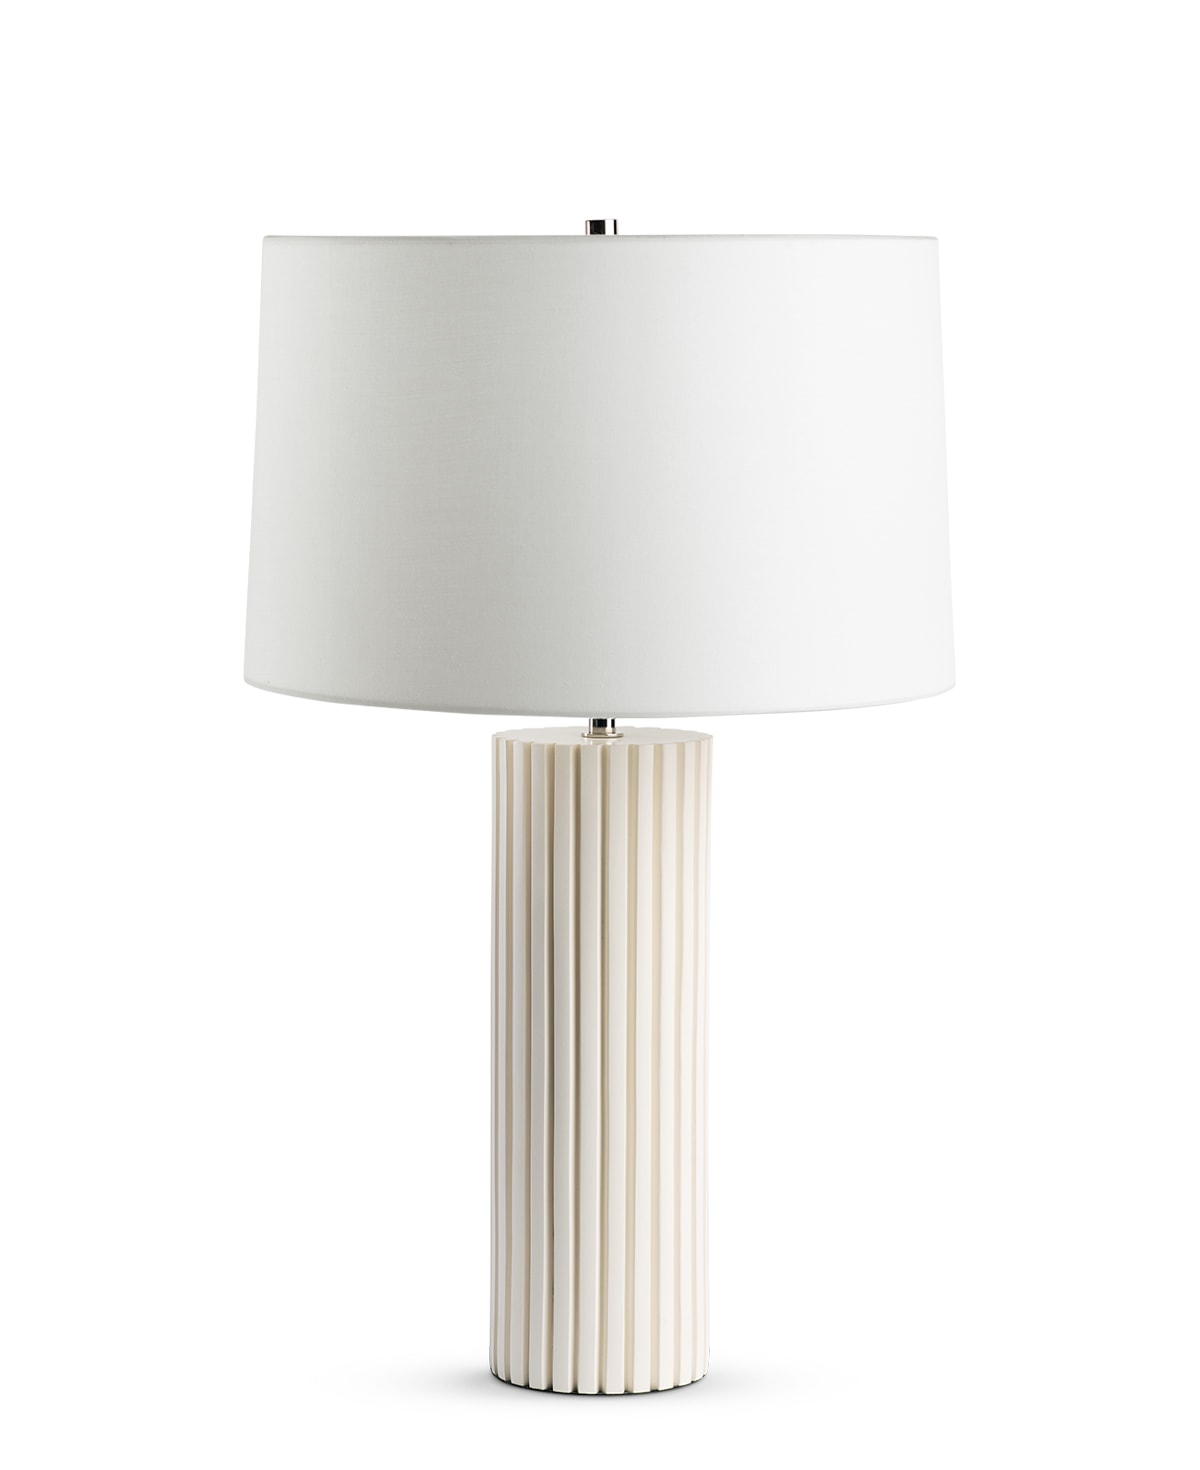 FlowDecor Dixon Table Lamp in resin with off-white matte finish and off-white cotton tapered drum shade (# 4519)